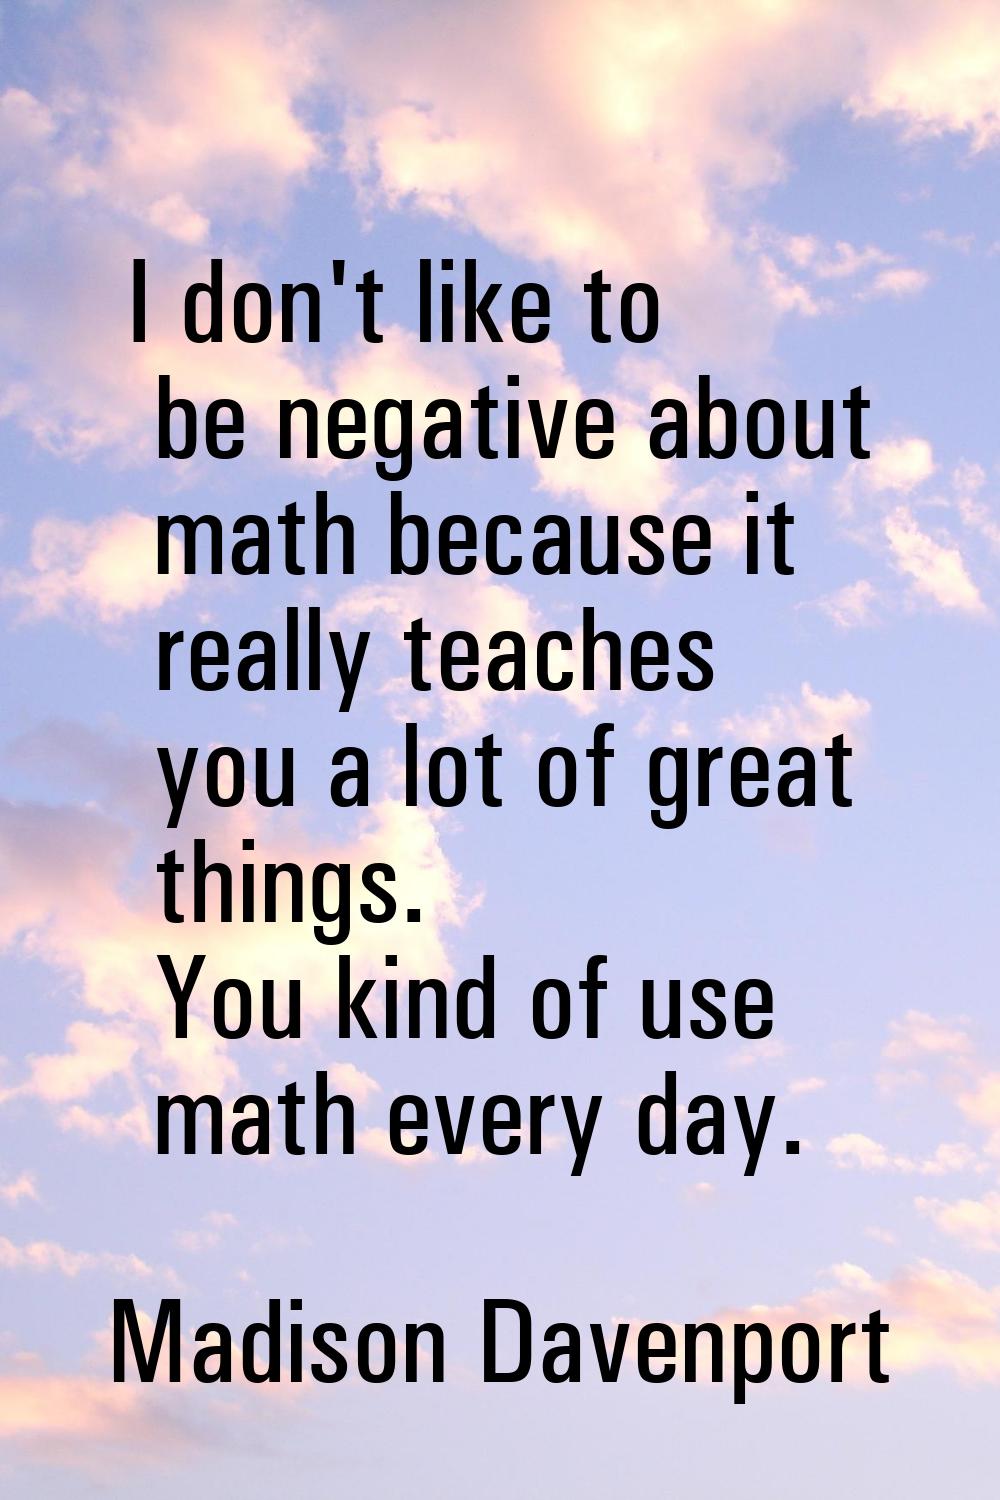 I don't like to be negative about math because it really teaches you a lot of great things. You kin